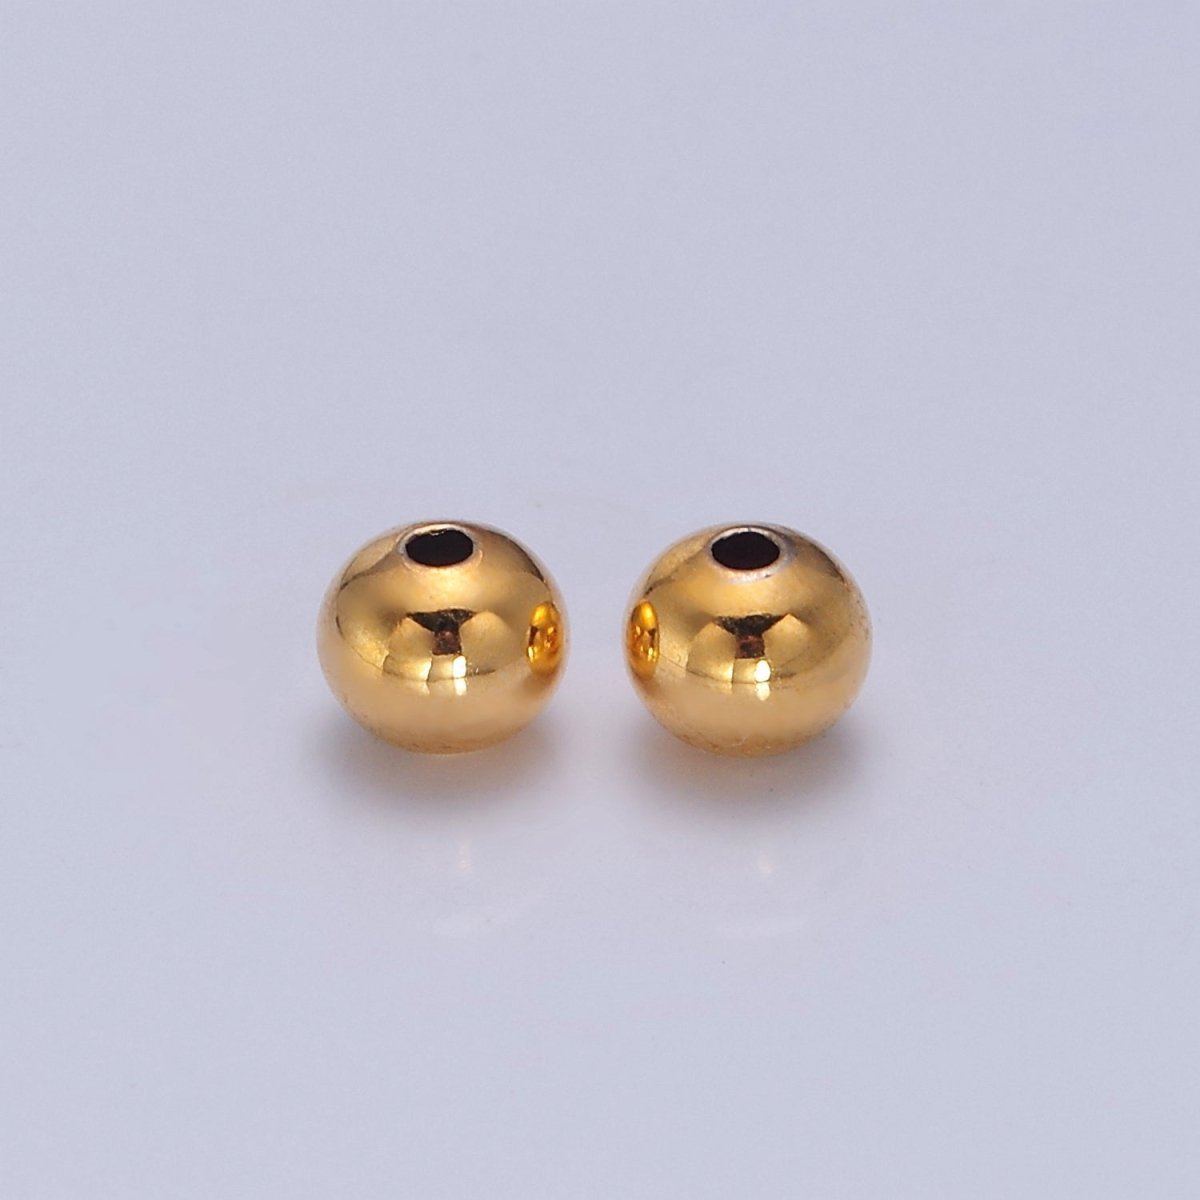 OS 4mm / 6mm 24K Gold Filled Beads. Gold Spacer Beads, Gold Spacer Ball Bracelet Connectors, Wholesale Jewelry Supplier L-744 L-745 - DLUXCA